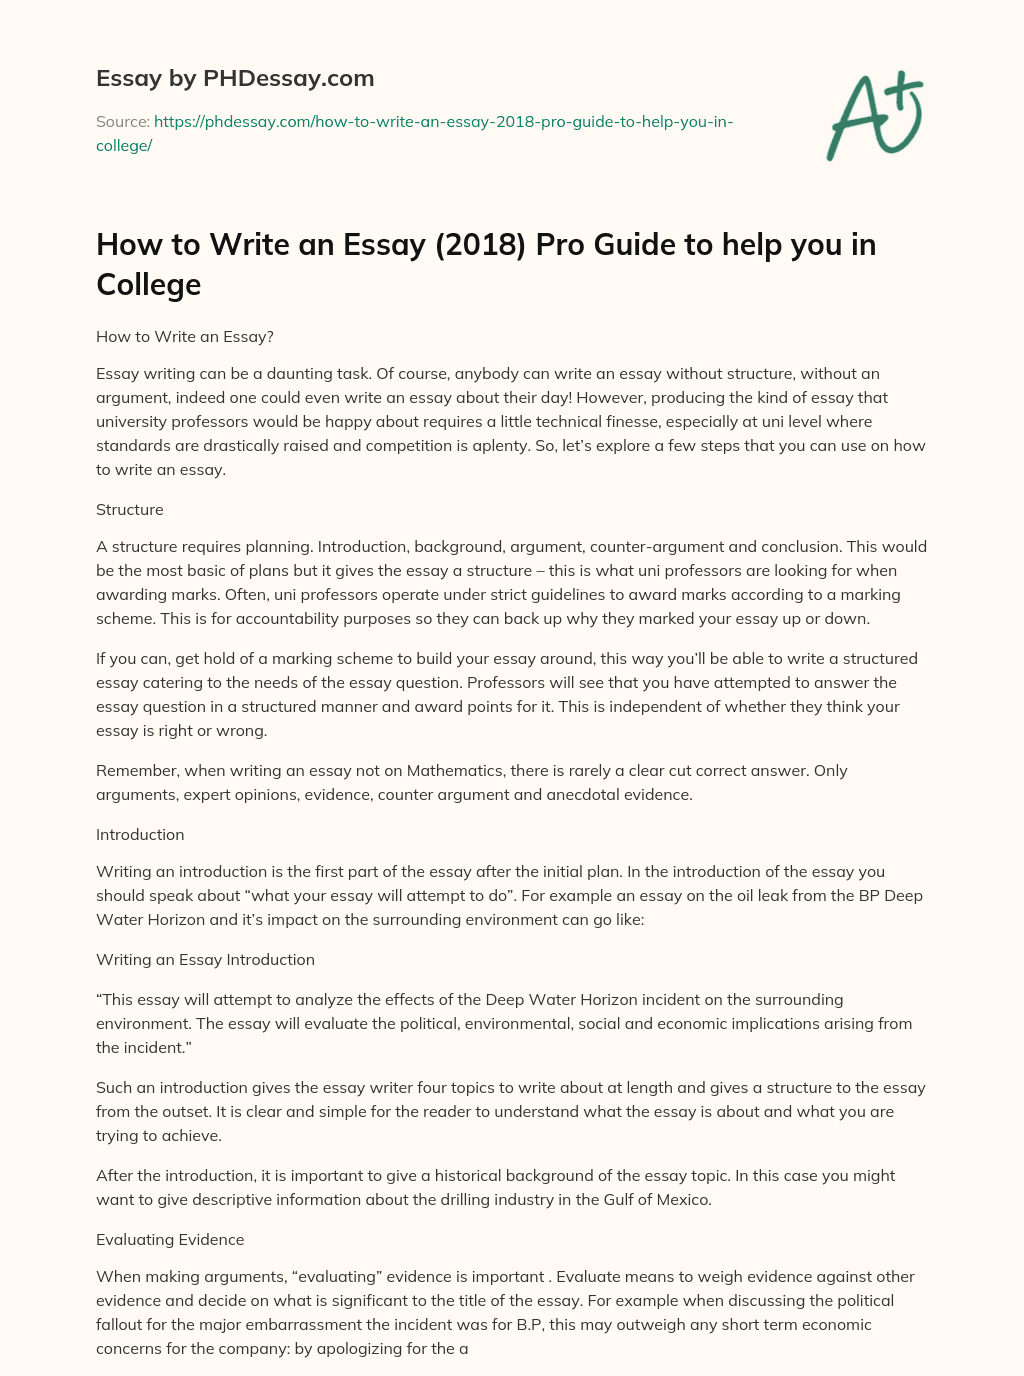 How to Write an Essay (2018) Pro Guide to help you in College essay